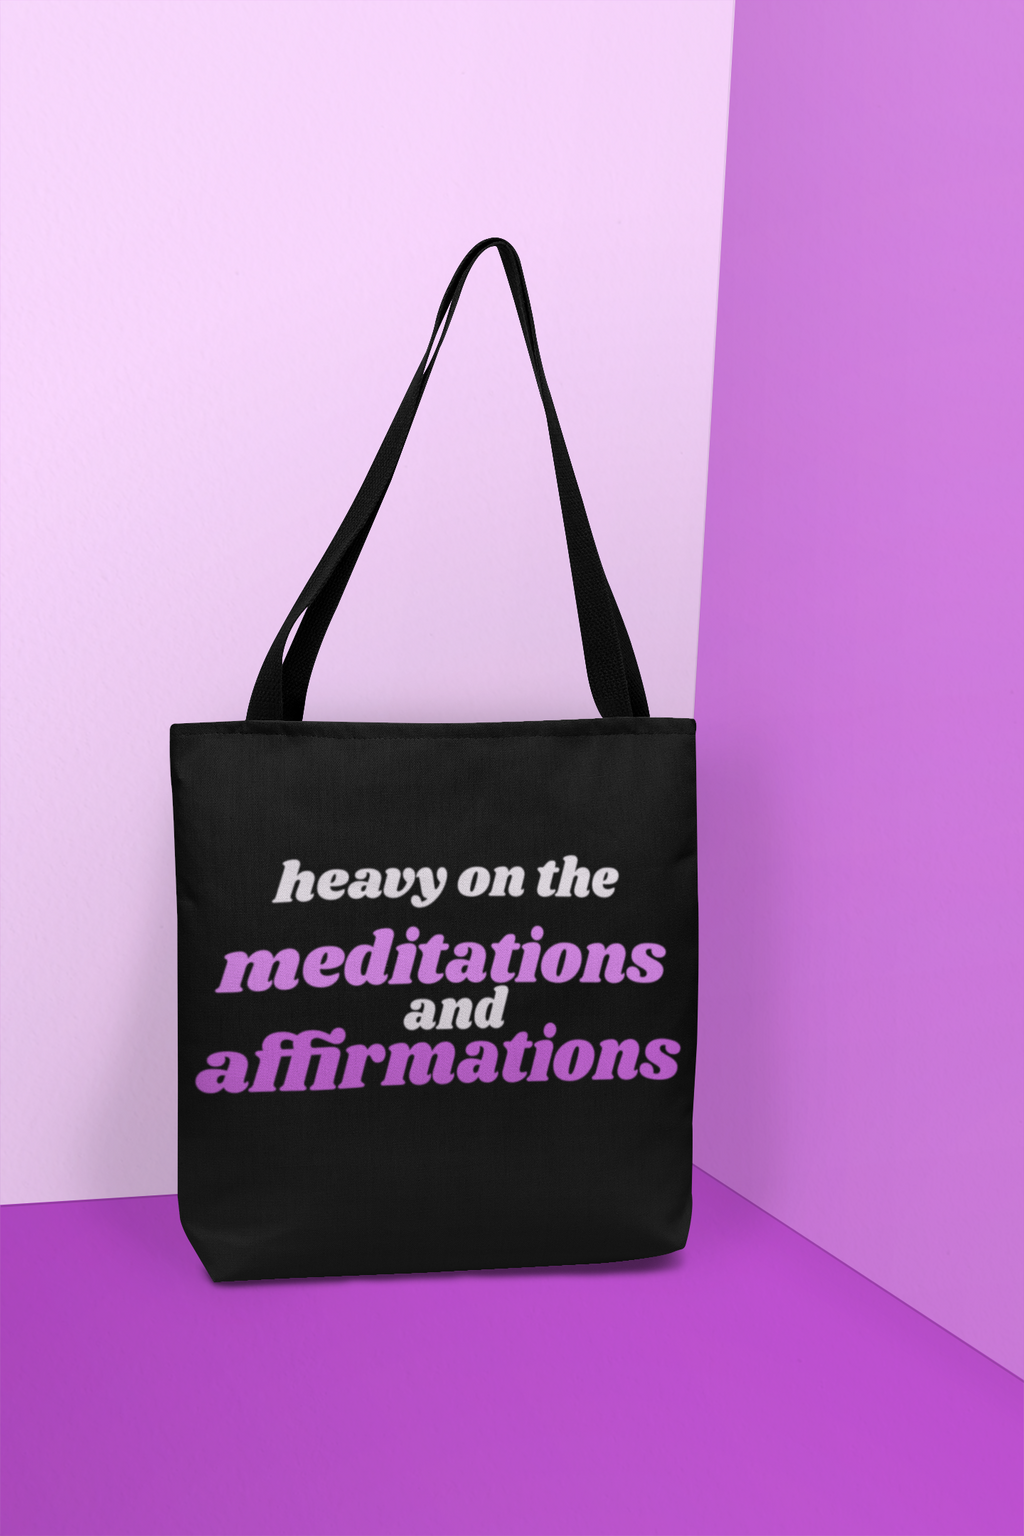 The Affirmations tote bag. Created by Yoga and Mahogany.